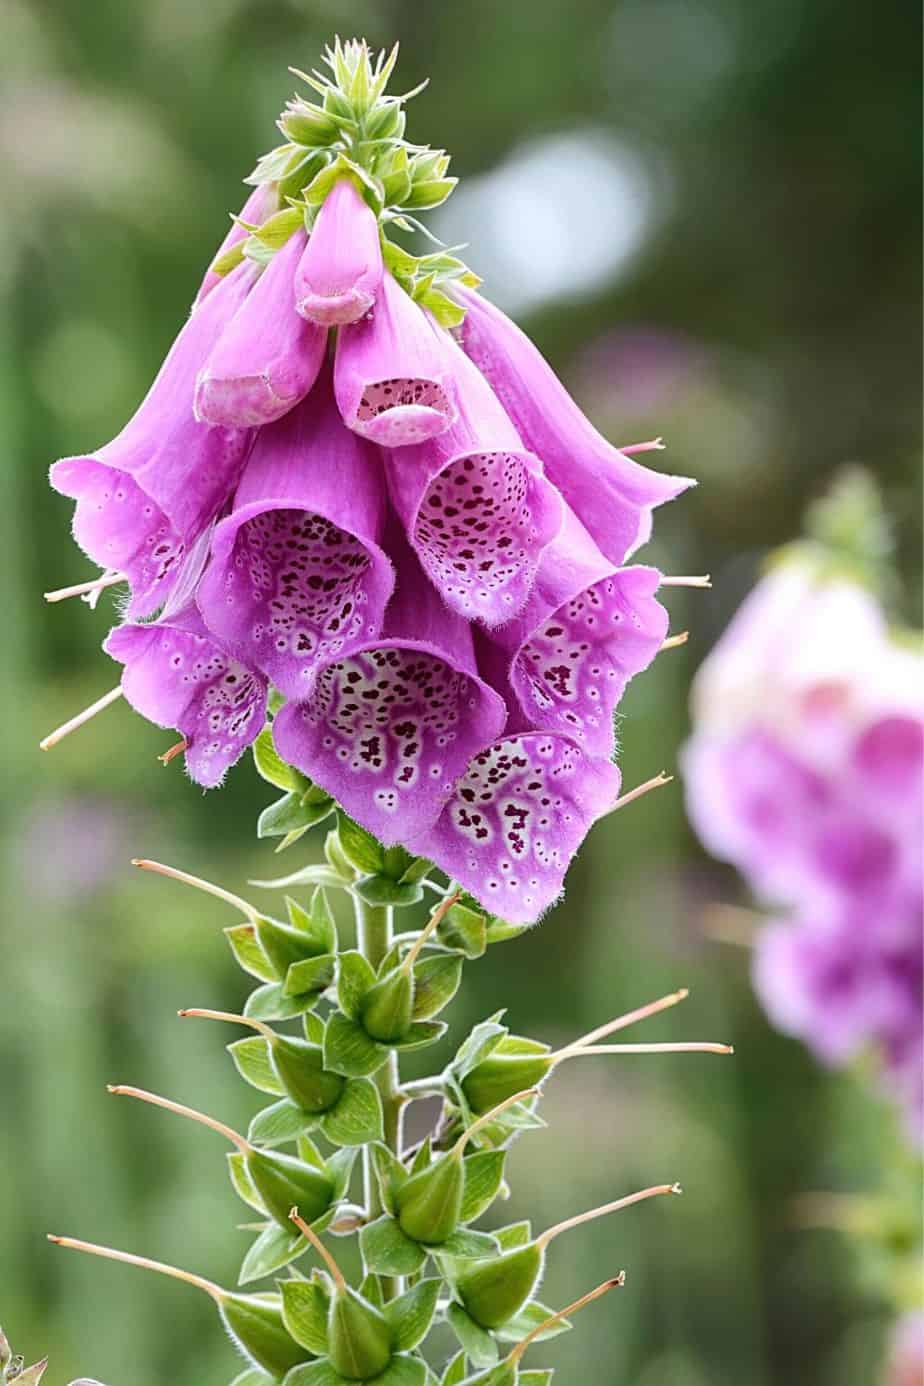 The Digitalis (Foxglove) flowers give your northwest-facing gardens an exotic look